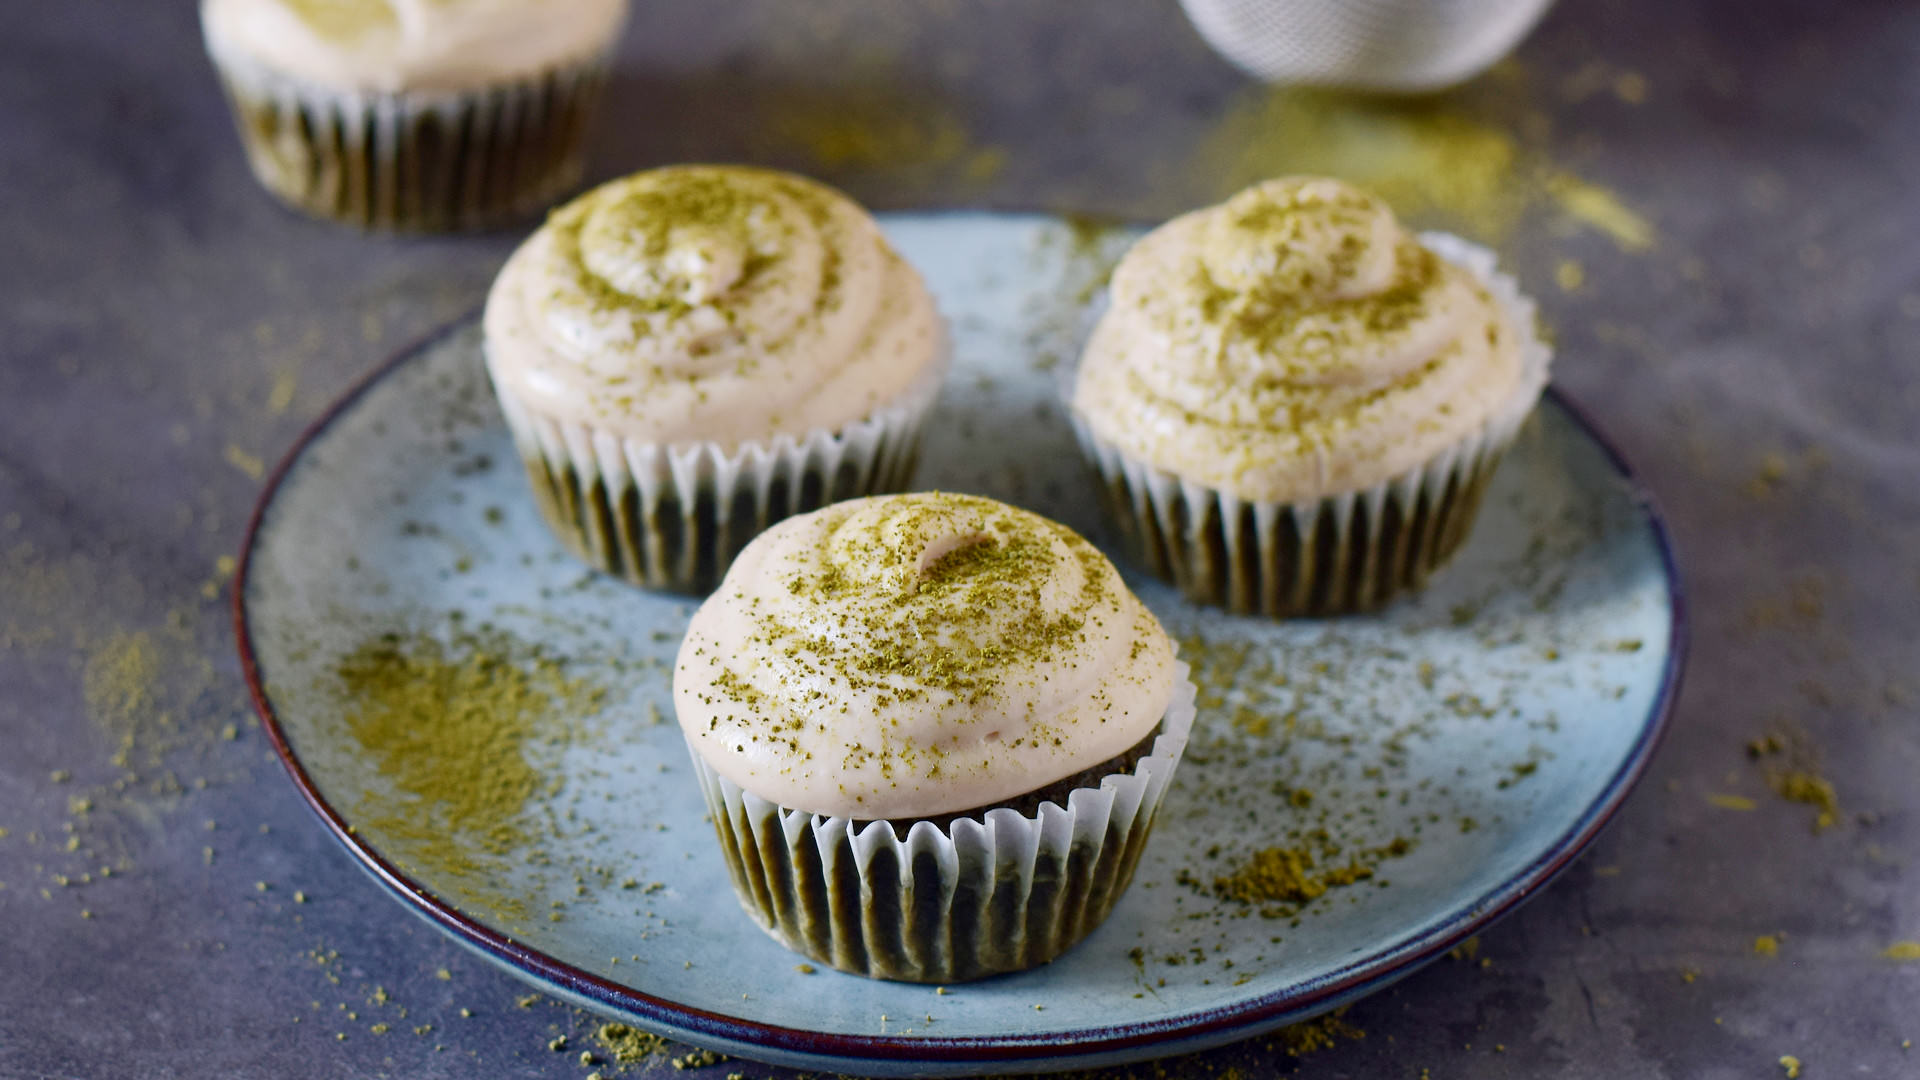 horizontal shot of 3 matcha cupcakes with white frosting on blue plate